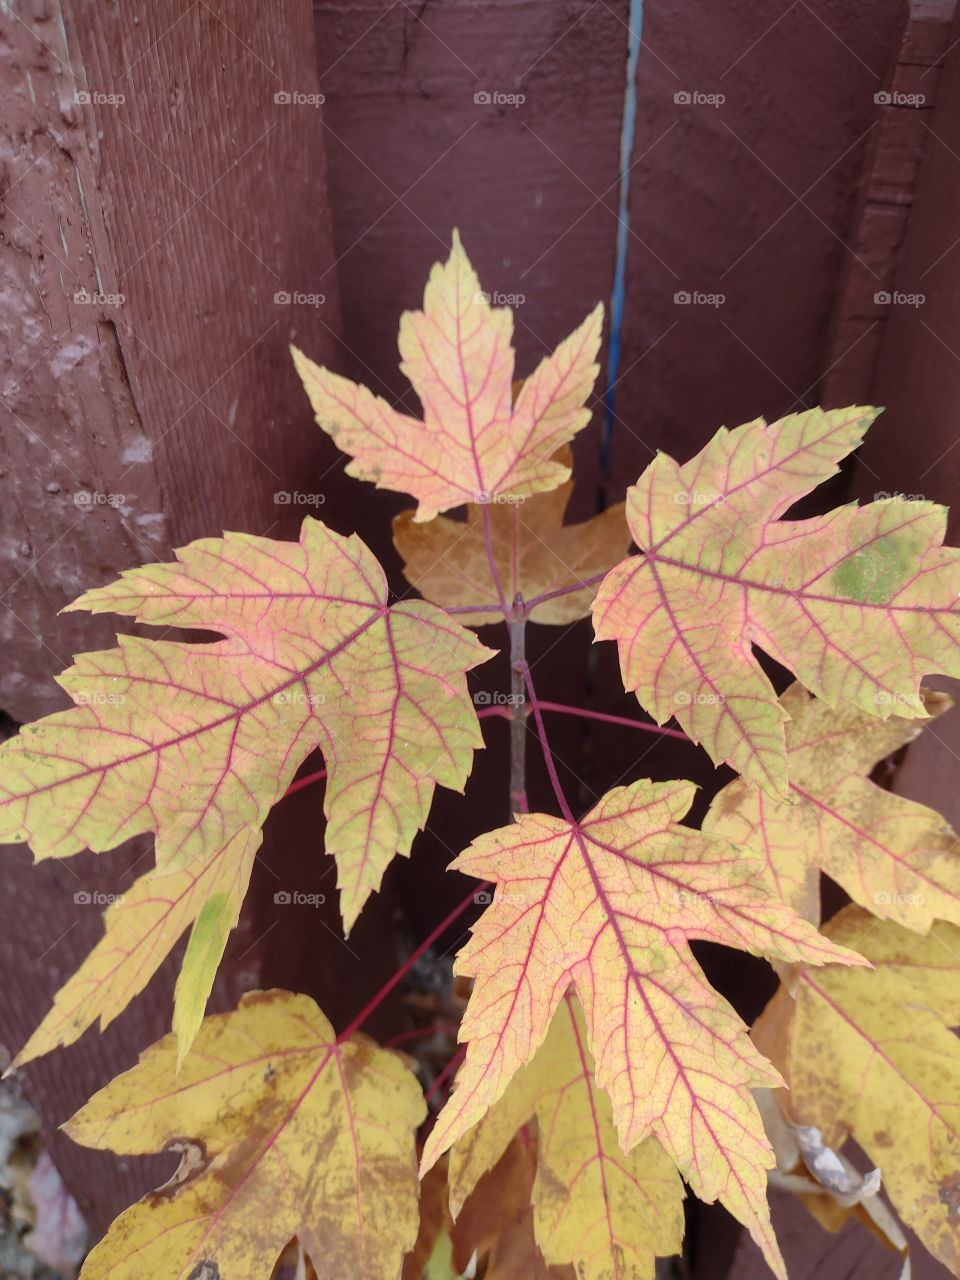 Unfiltered, beautiful, lovely leaves in autumn